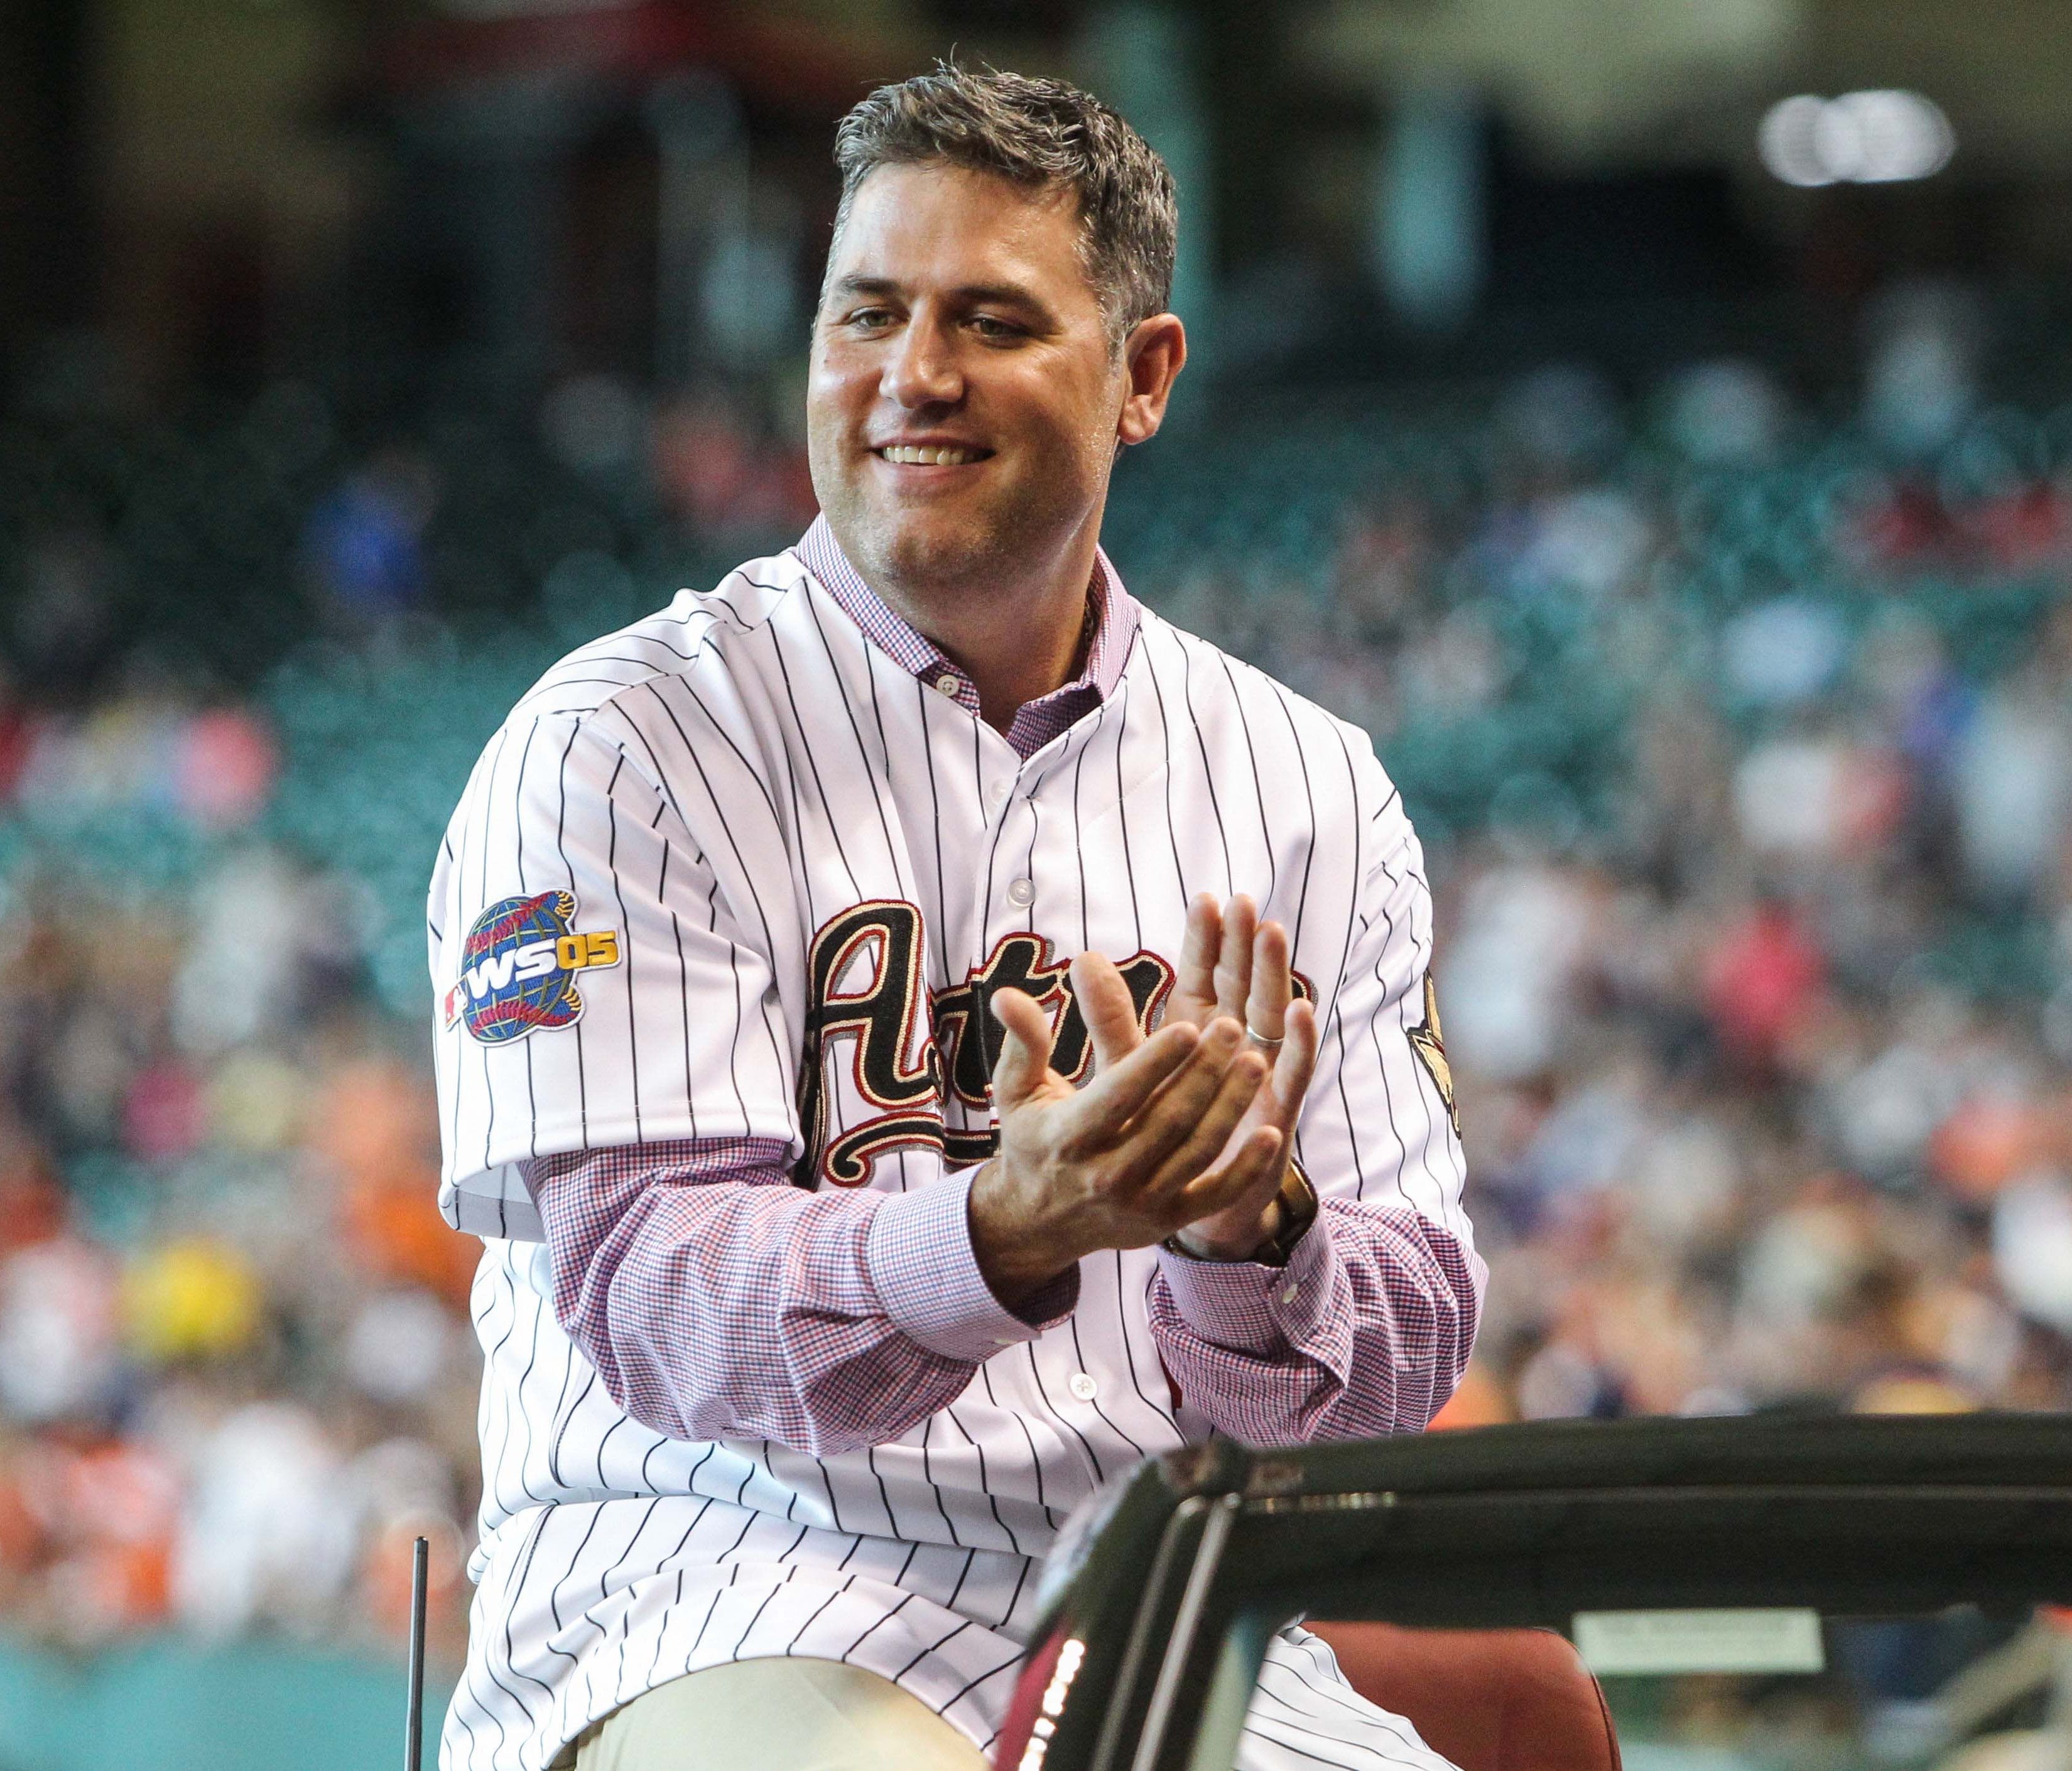 Lance Berkman is facing criticism for participating in an upcoming 